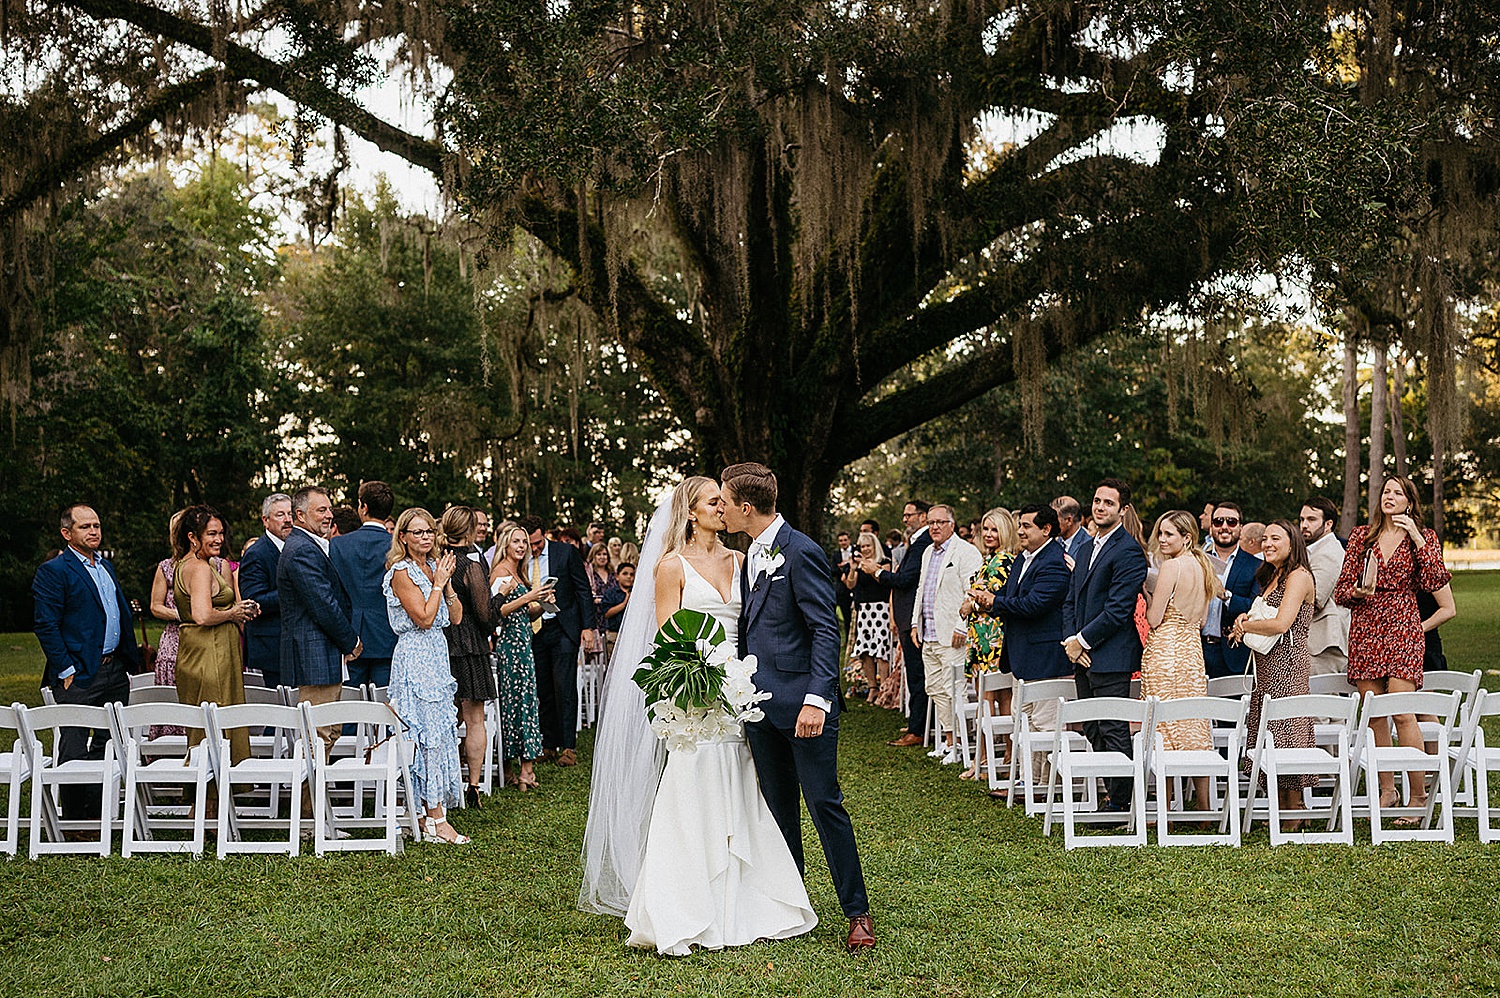 Bride and groom walk back up the aisle after ceremony during destination wedding 